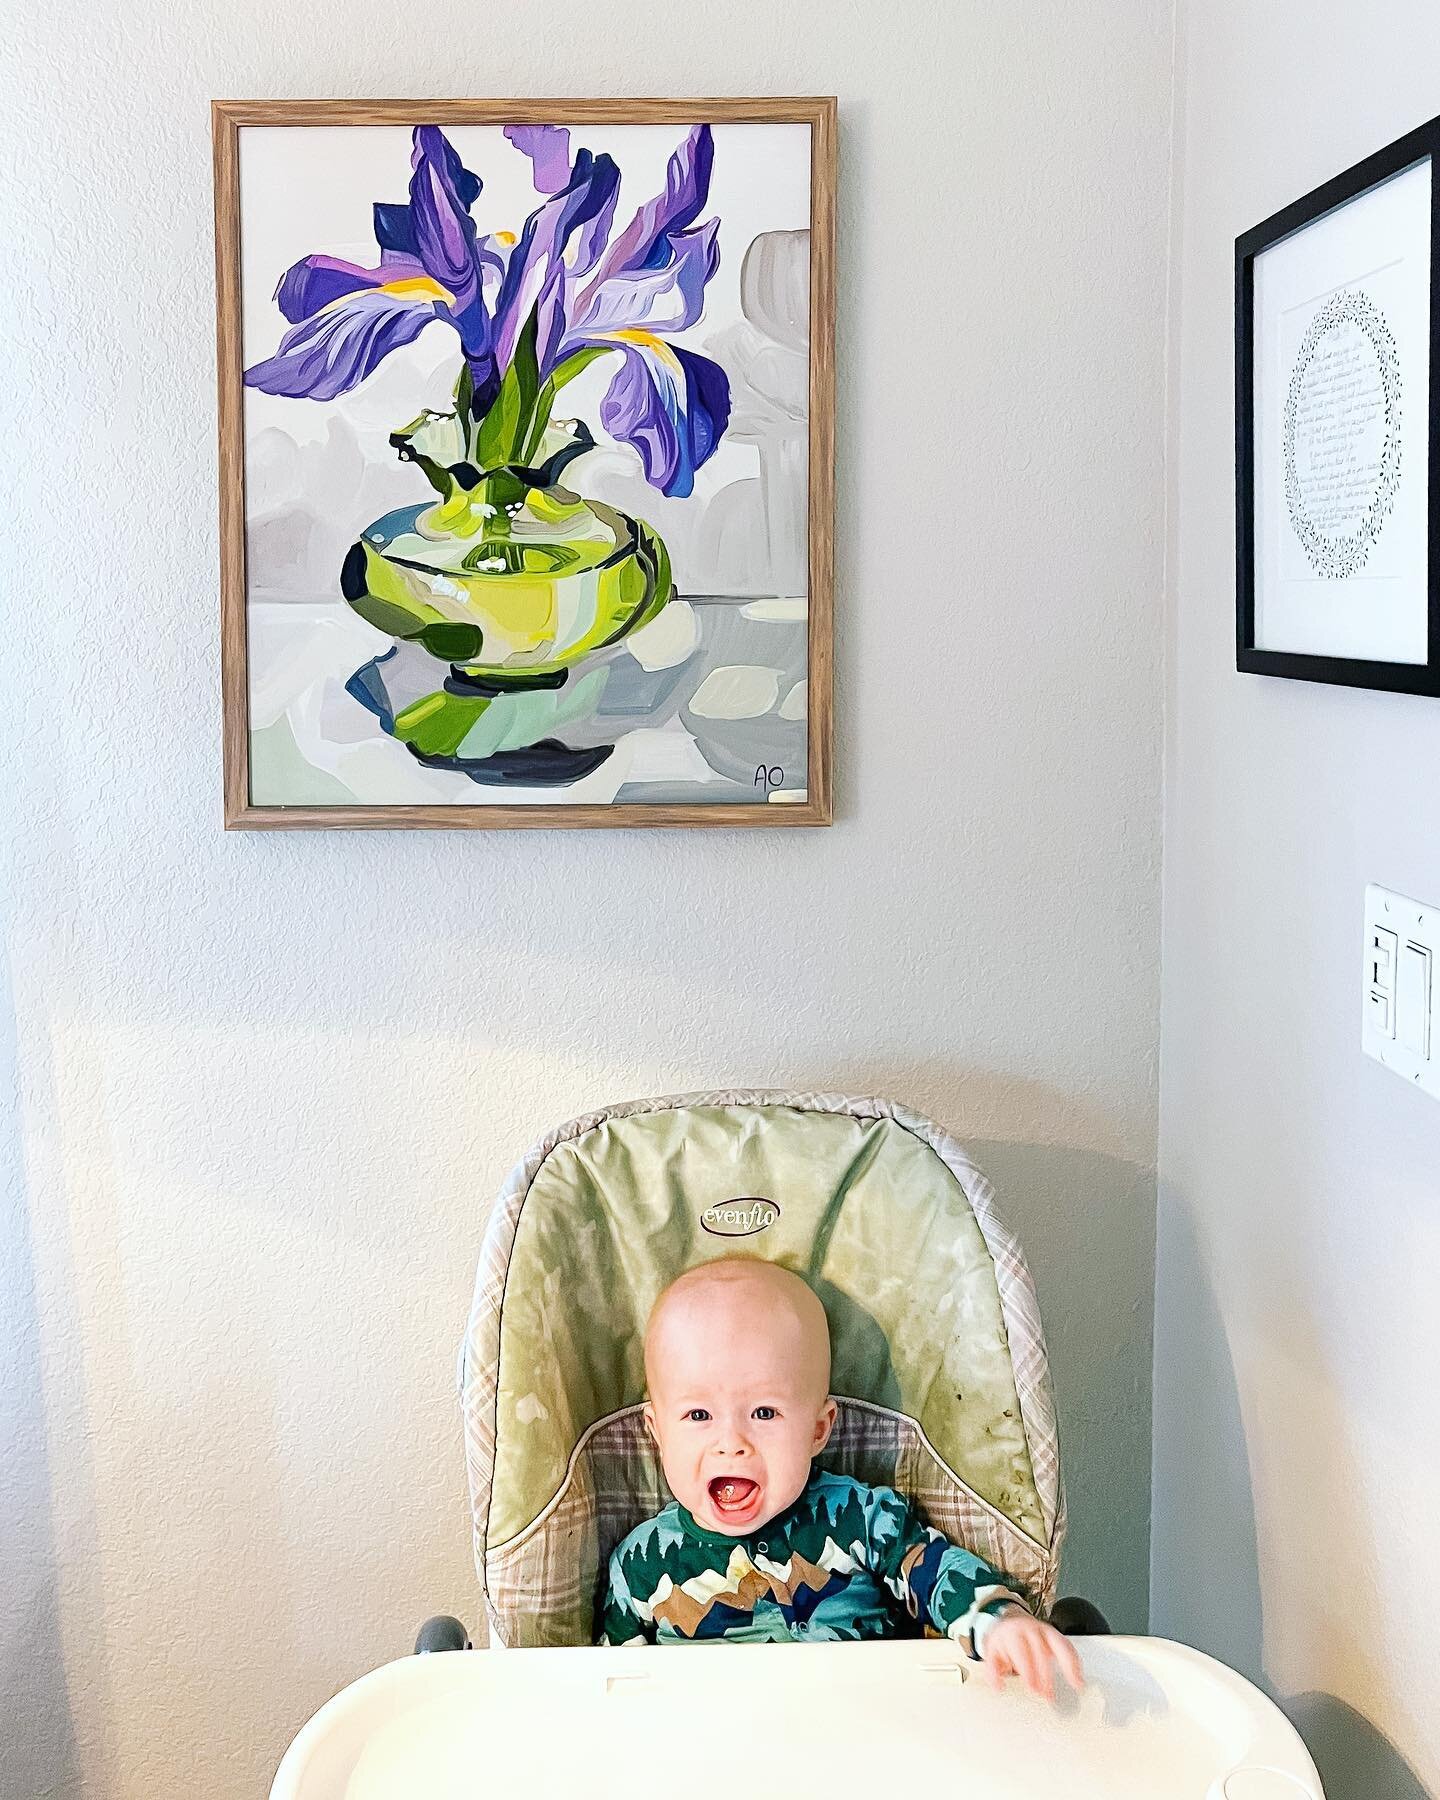 🤍 Jaw dropper and show stopper 🤍

For the last few days, I&rsquo;ve gotten yo@spend some time with an old friend and her new baby. What a gift. He sits under one of my paintings from 2021 and another from 2015 every morning for breakfast. I&rsquo;m